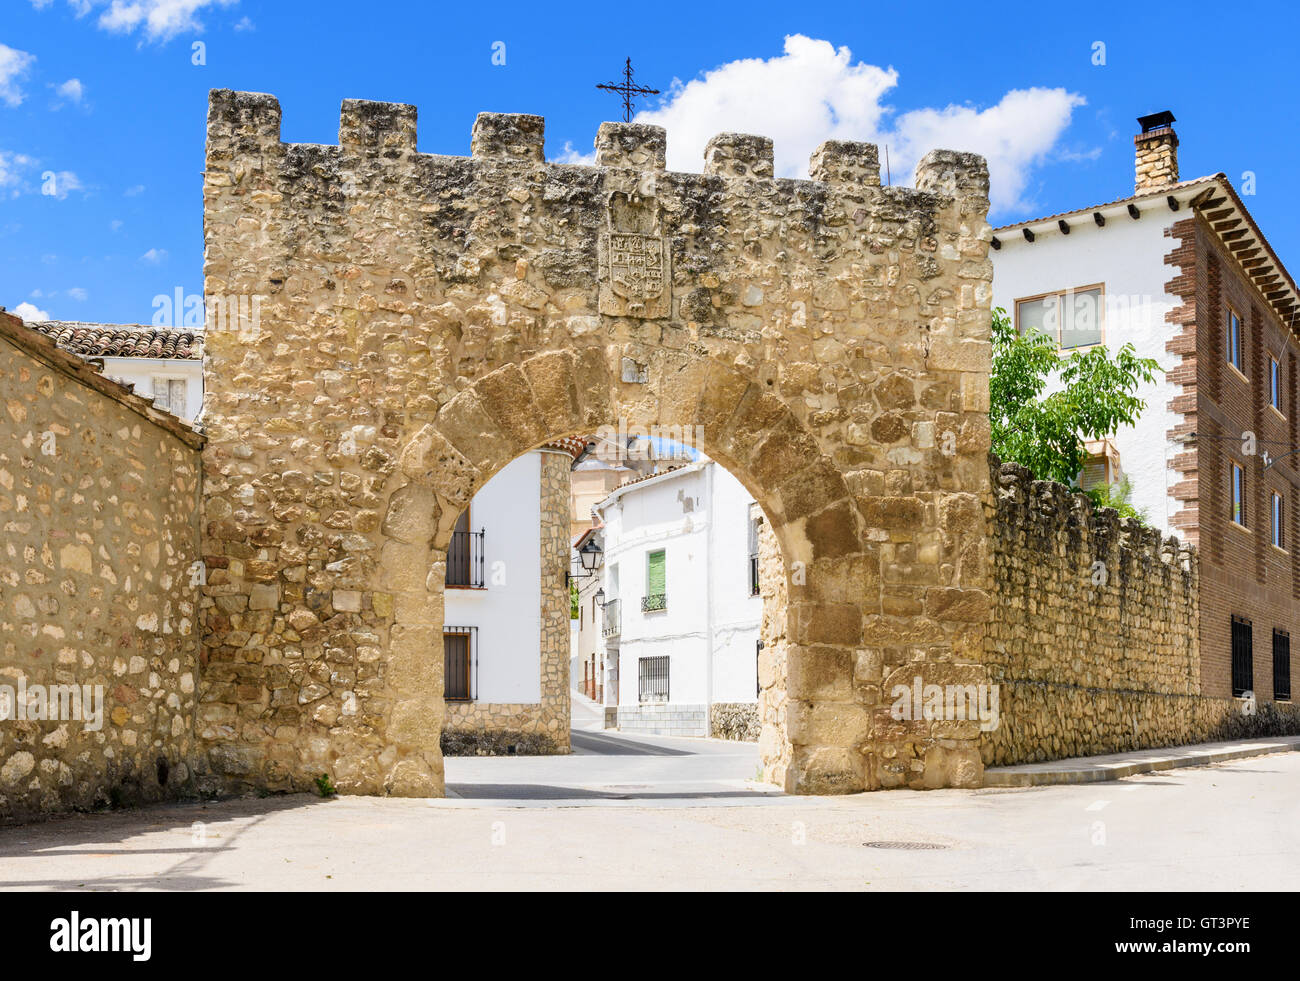 The Puerta del Agua, the entrance gate into the town of Ucles, Spain Stock Photo